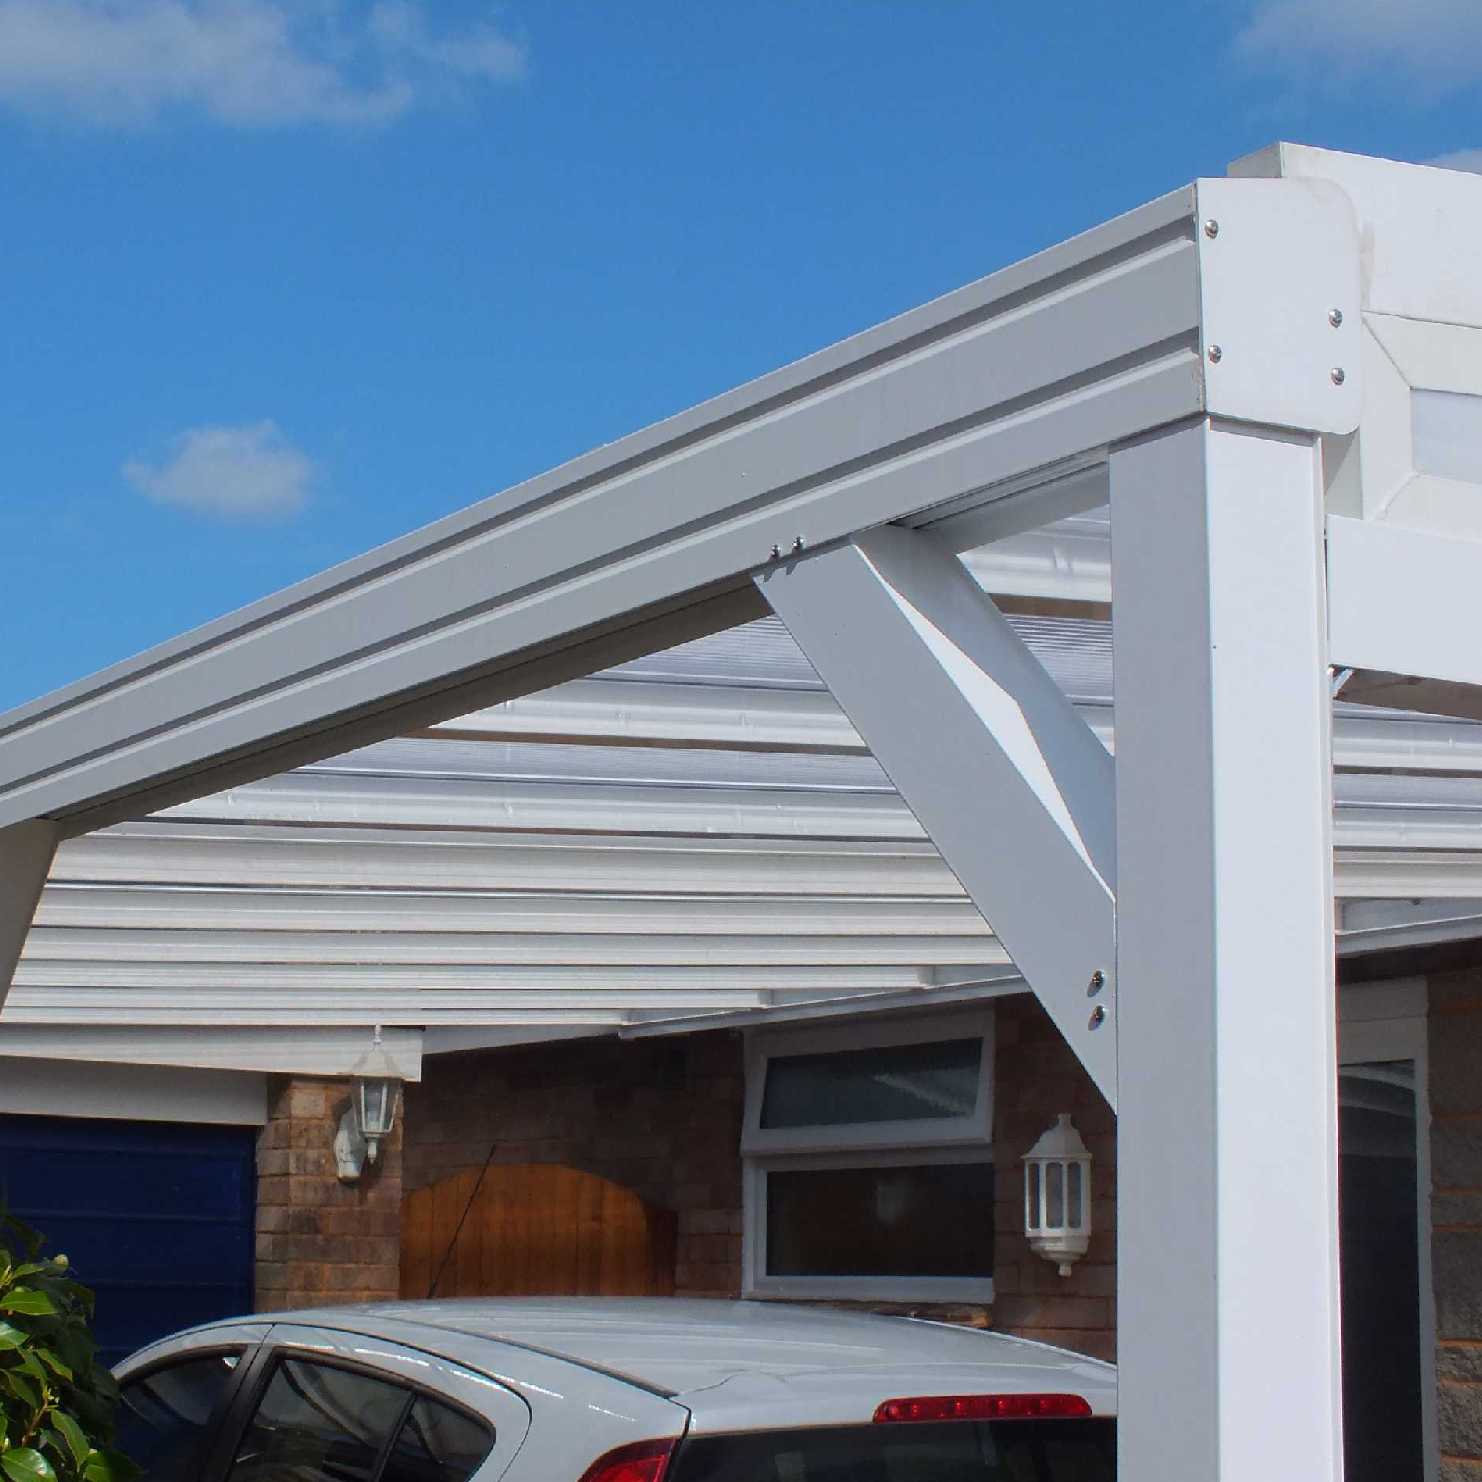 Buy Omega Smart Lean-To Canopy, White with 16mm Polycarbonate Glazing - 6.0m (W) x 3.5m (P), (3) Supporting Posts online today